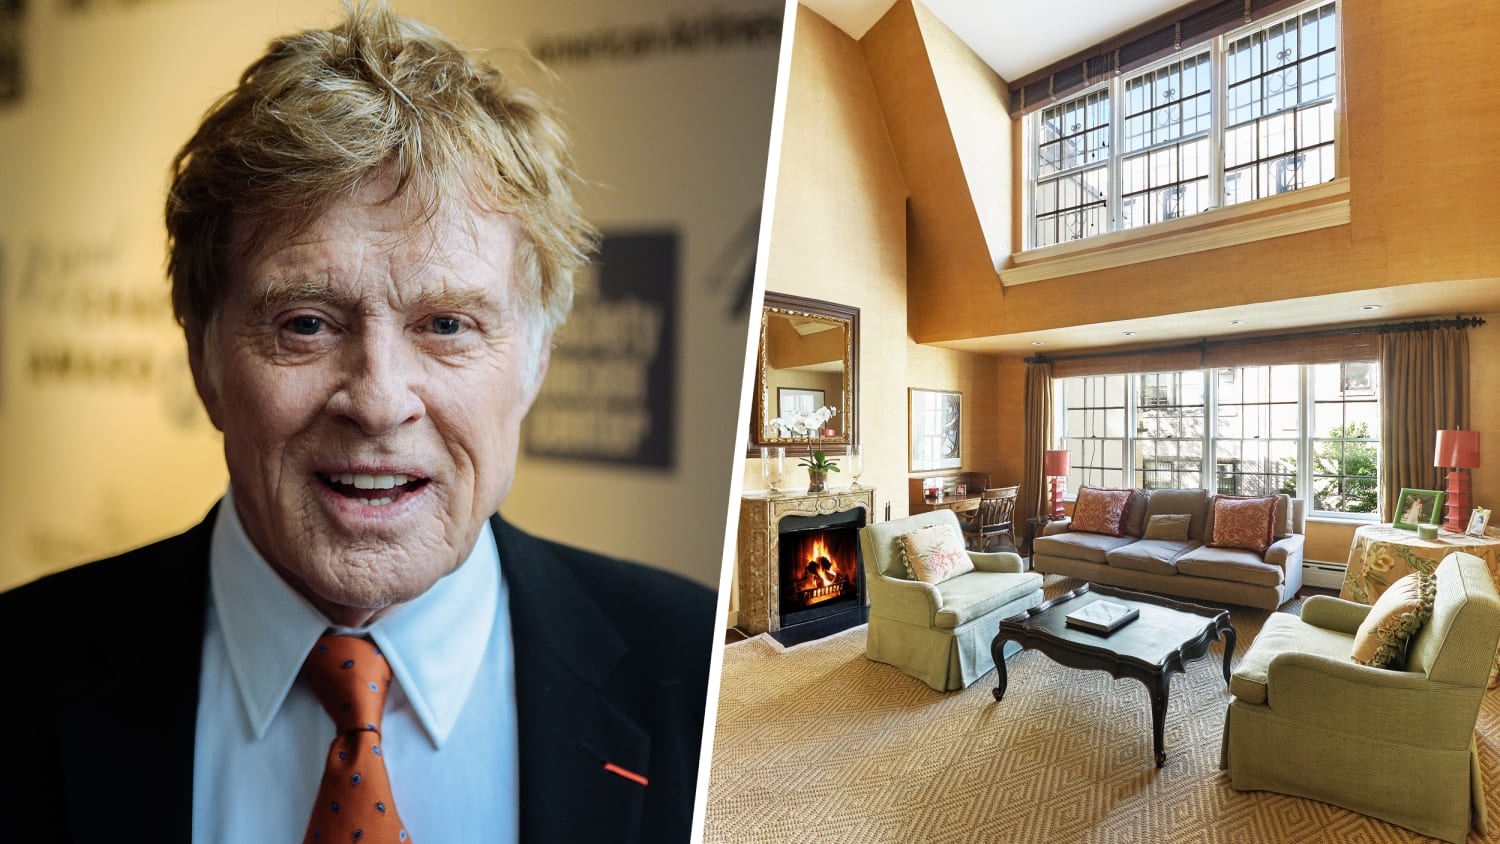 Robert Redford's swanky Manhattan apartment is for sale - see inside! 